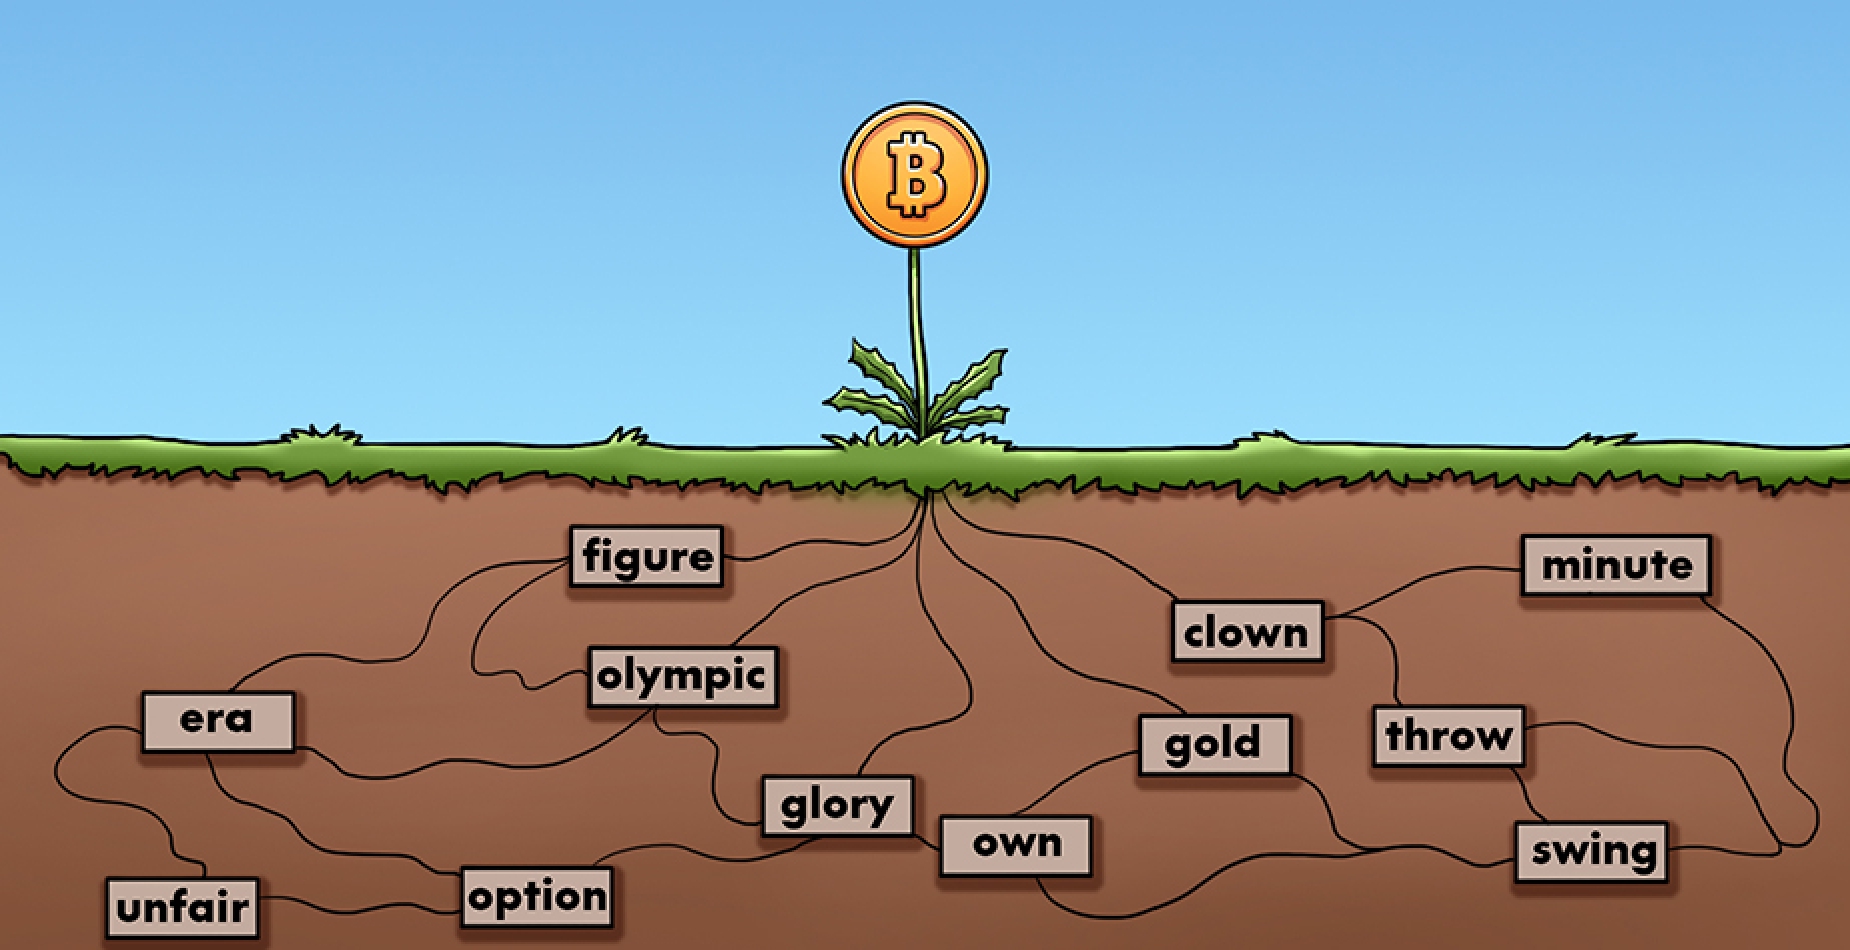 Dandelion with a Bitcoin as a Blossom. Under the ground are the roots that are connected via the 12 words of the seed phrase.